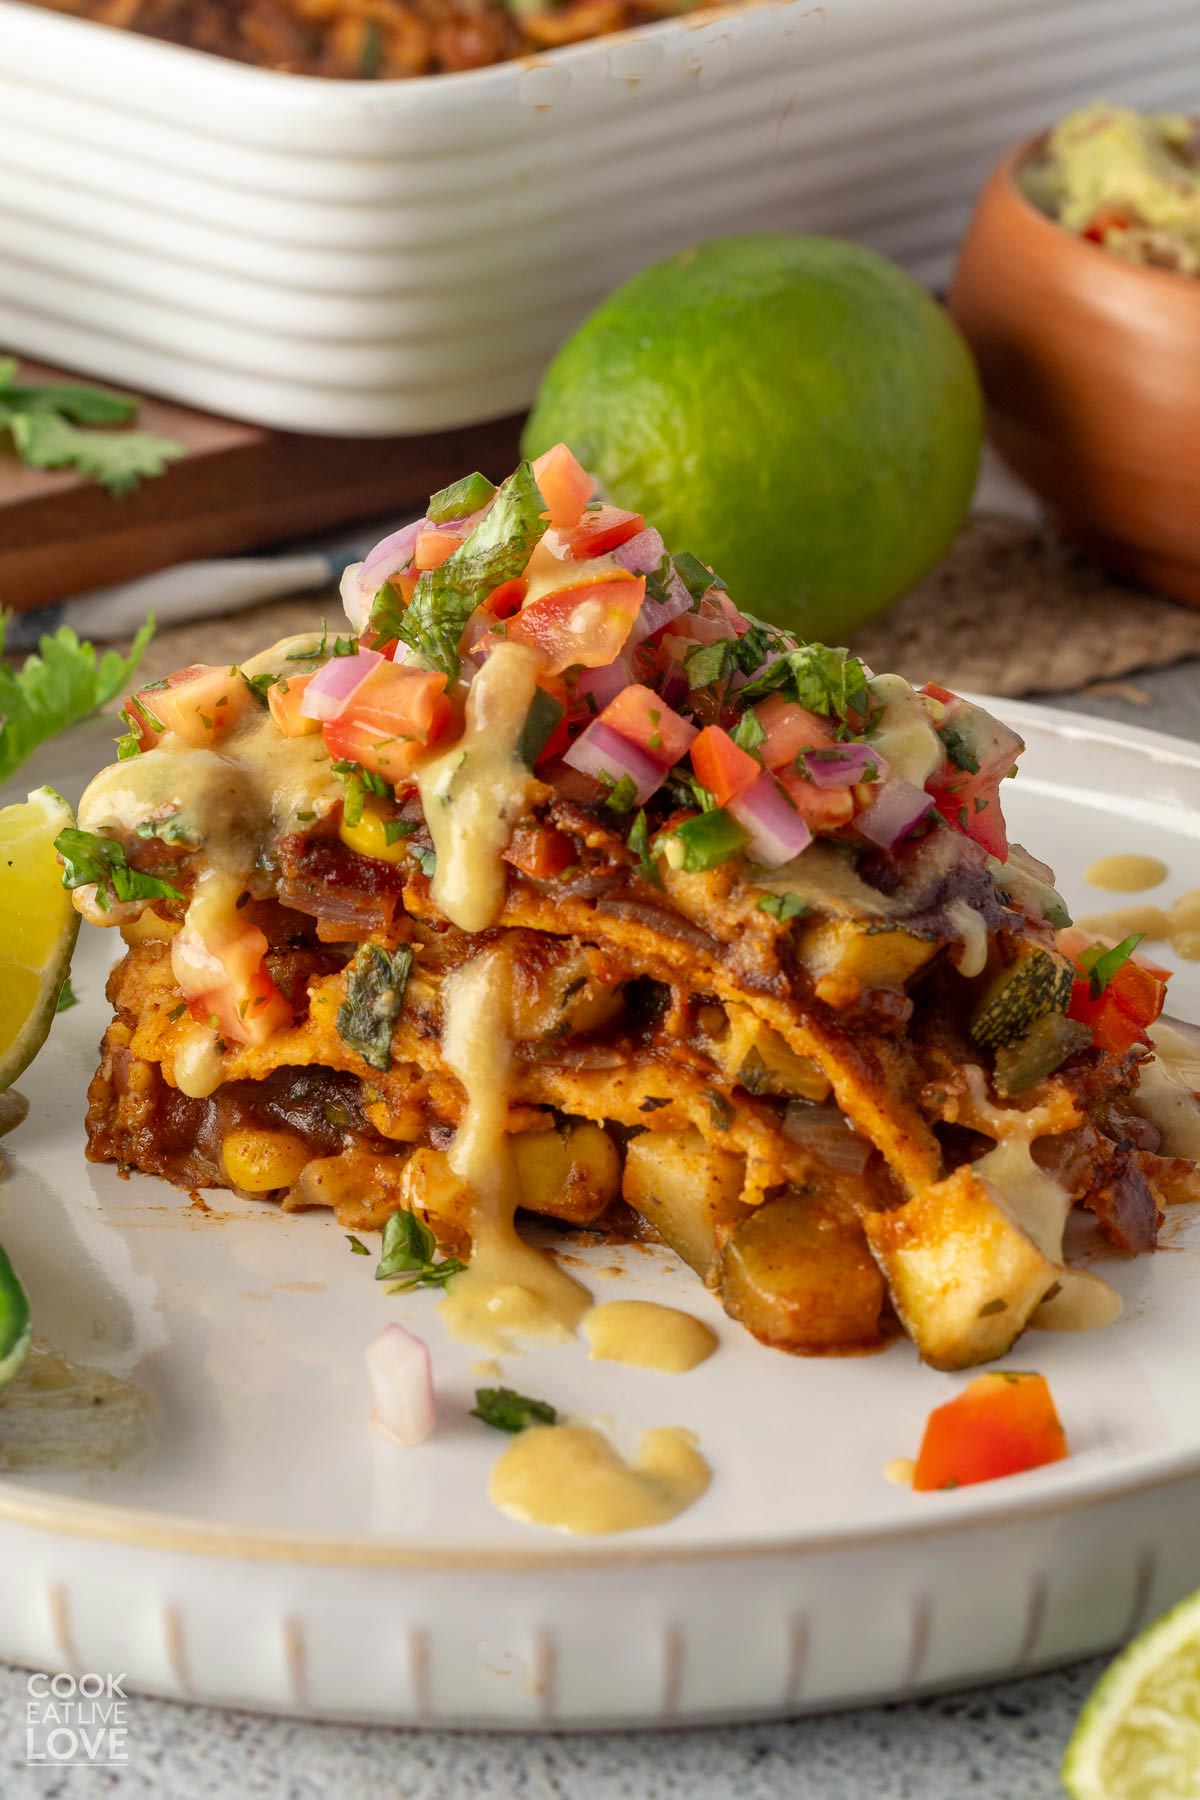 A serving of vegan enchilada casserole on a plate garnished with pico de gallo.